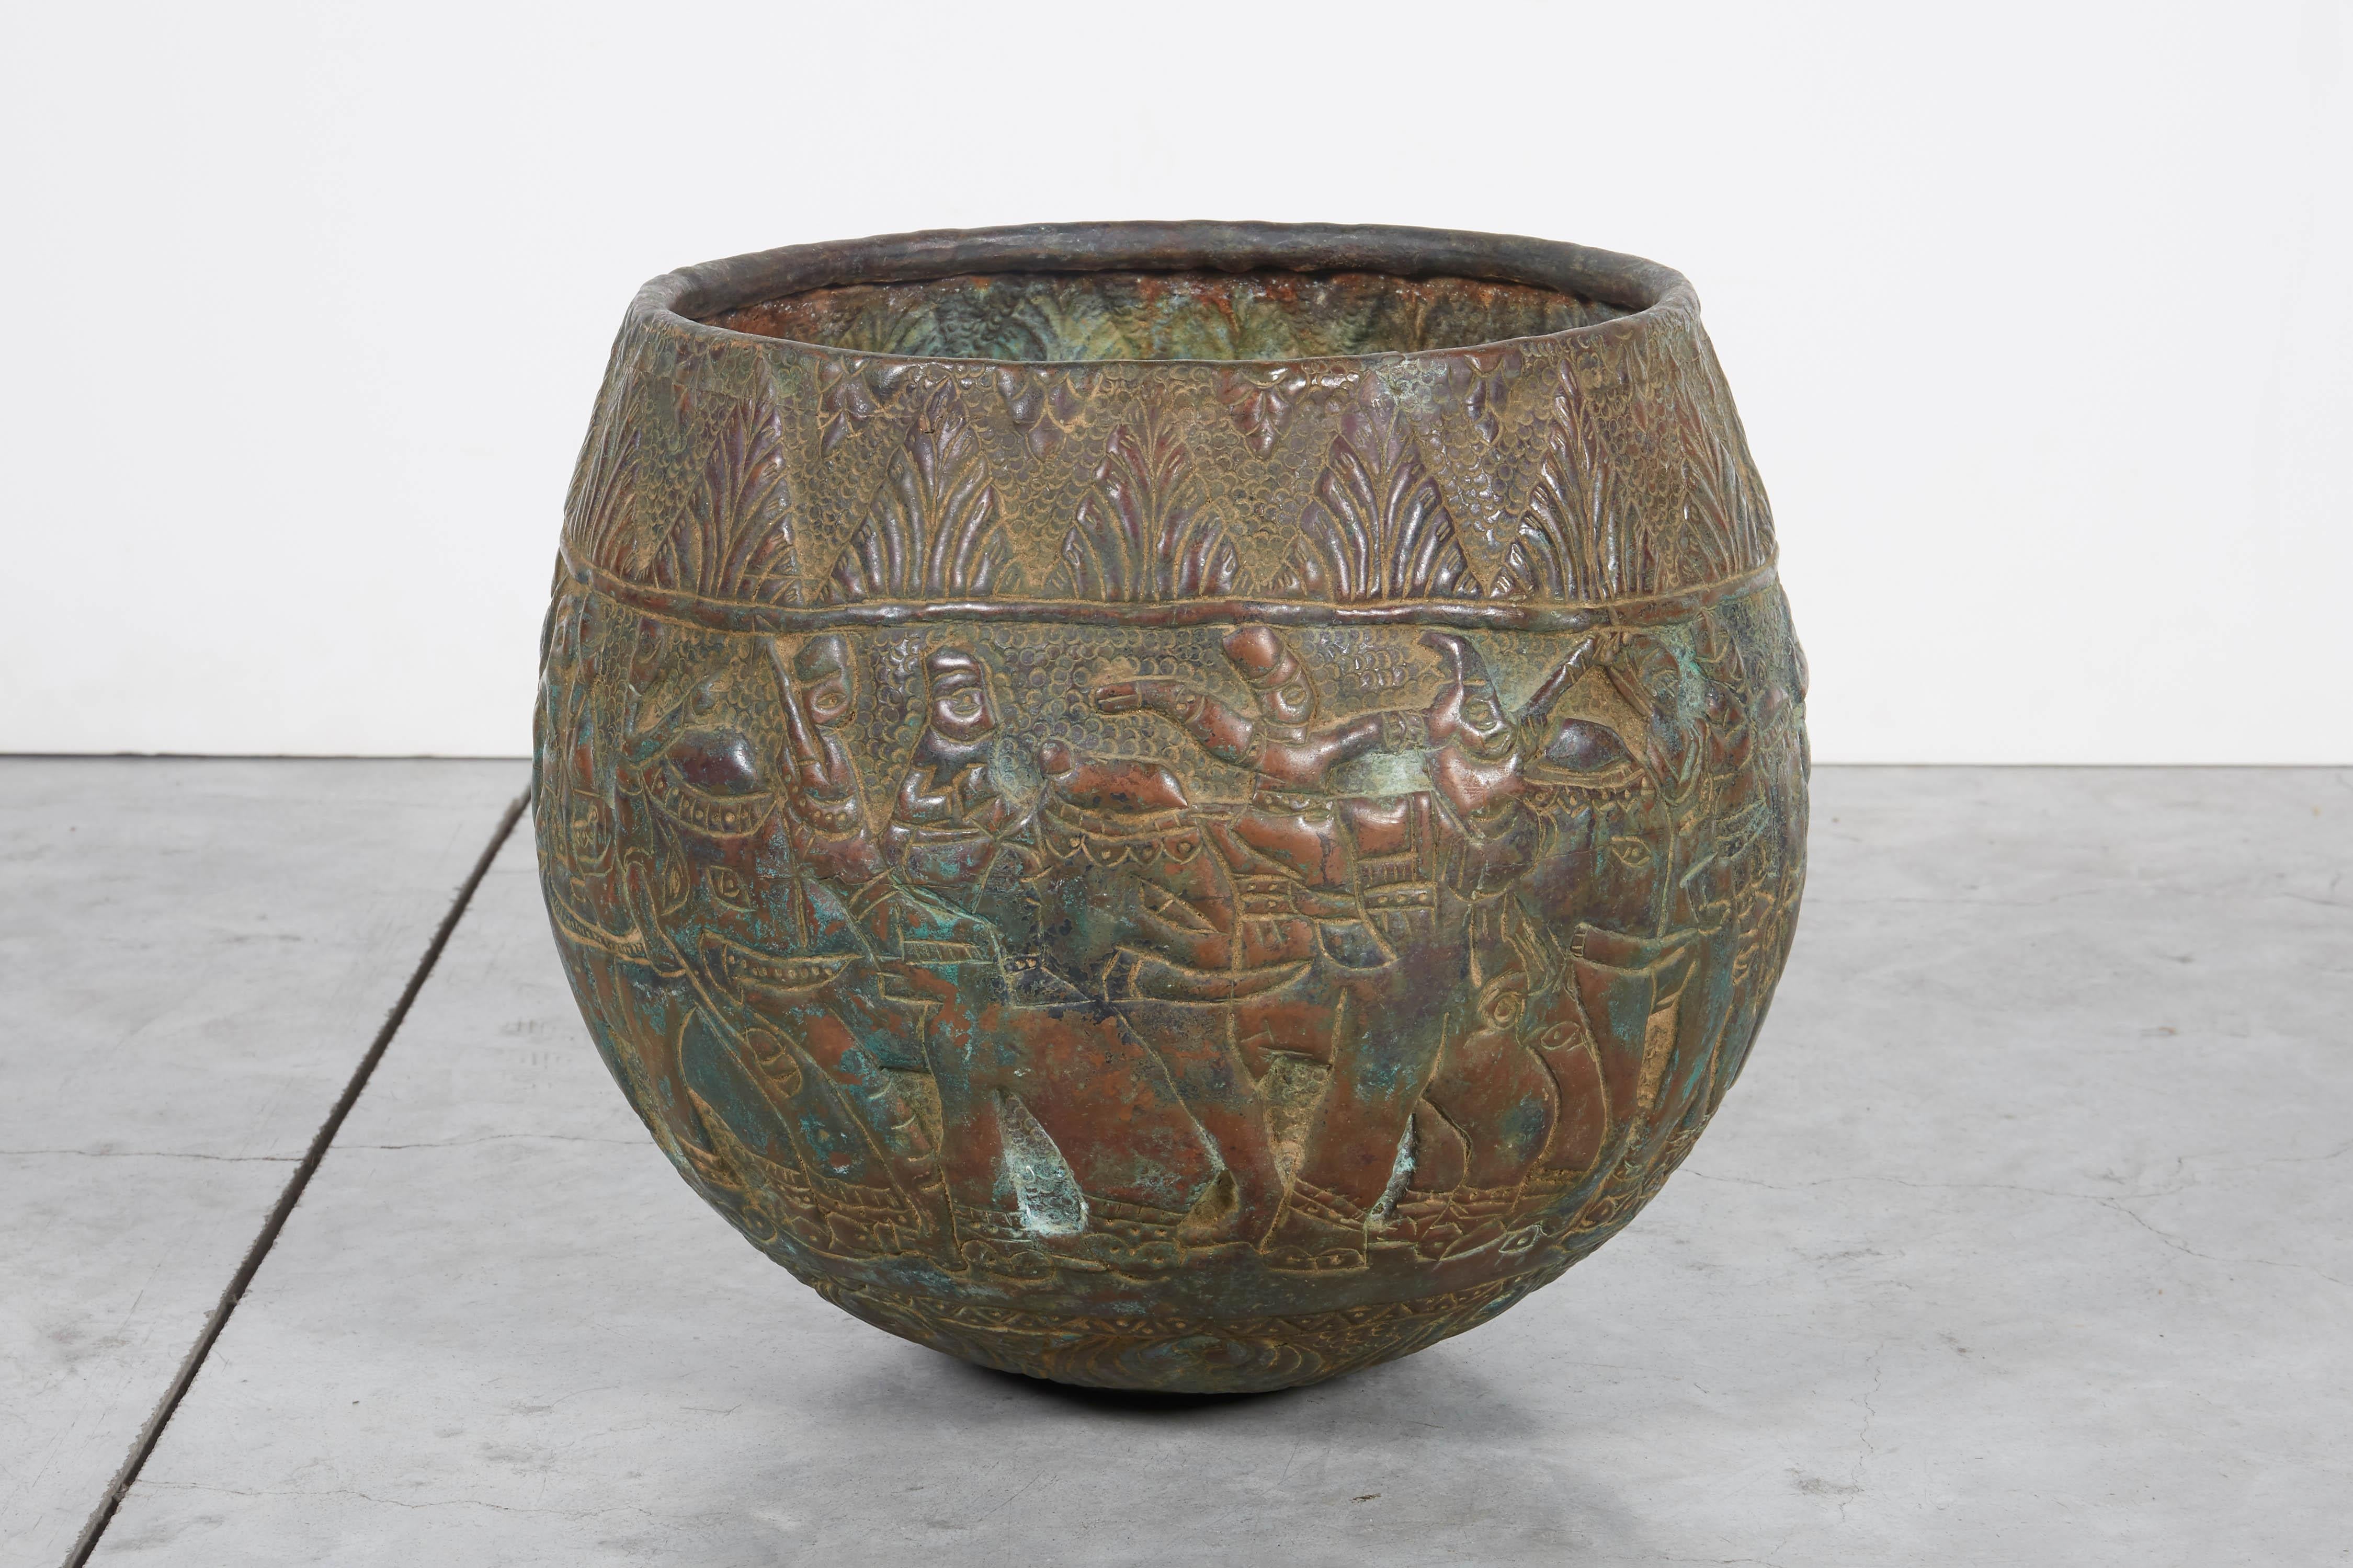 An expertly handcrafted copper repousse grain storage bowl with extraordinarily detailed images of elephants and other local folklore from Bangladesh. This gracefully shaped bowl has a lovely soft green patina that will complement any space.
M2031.